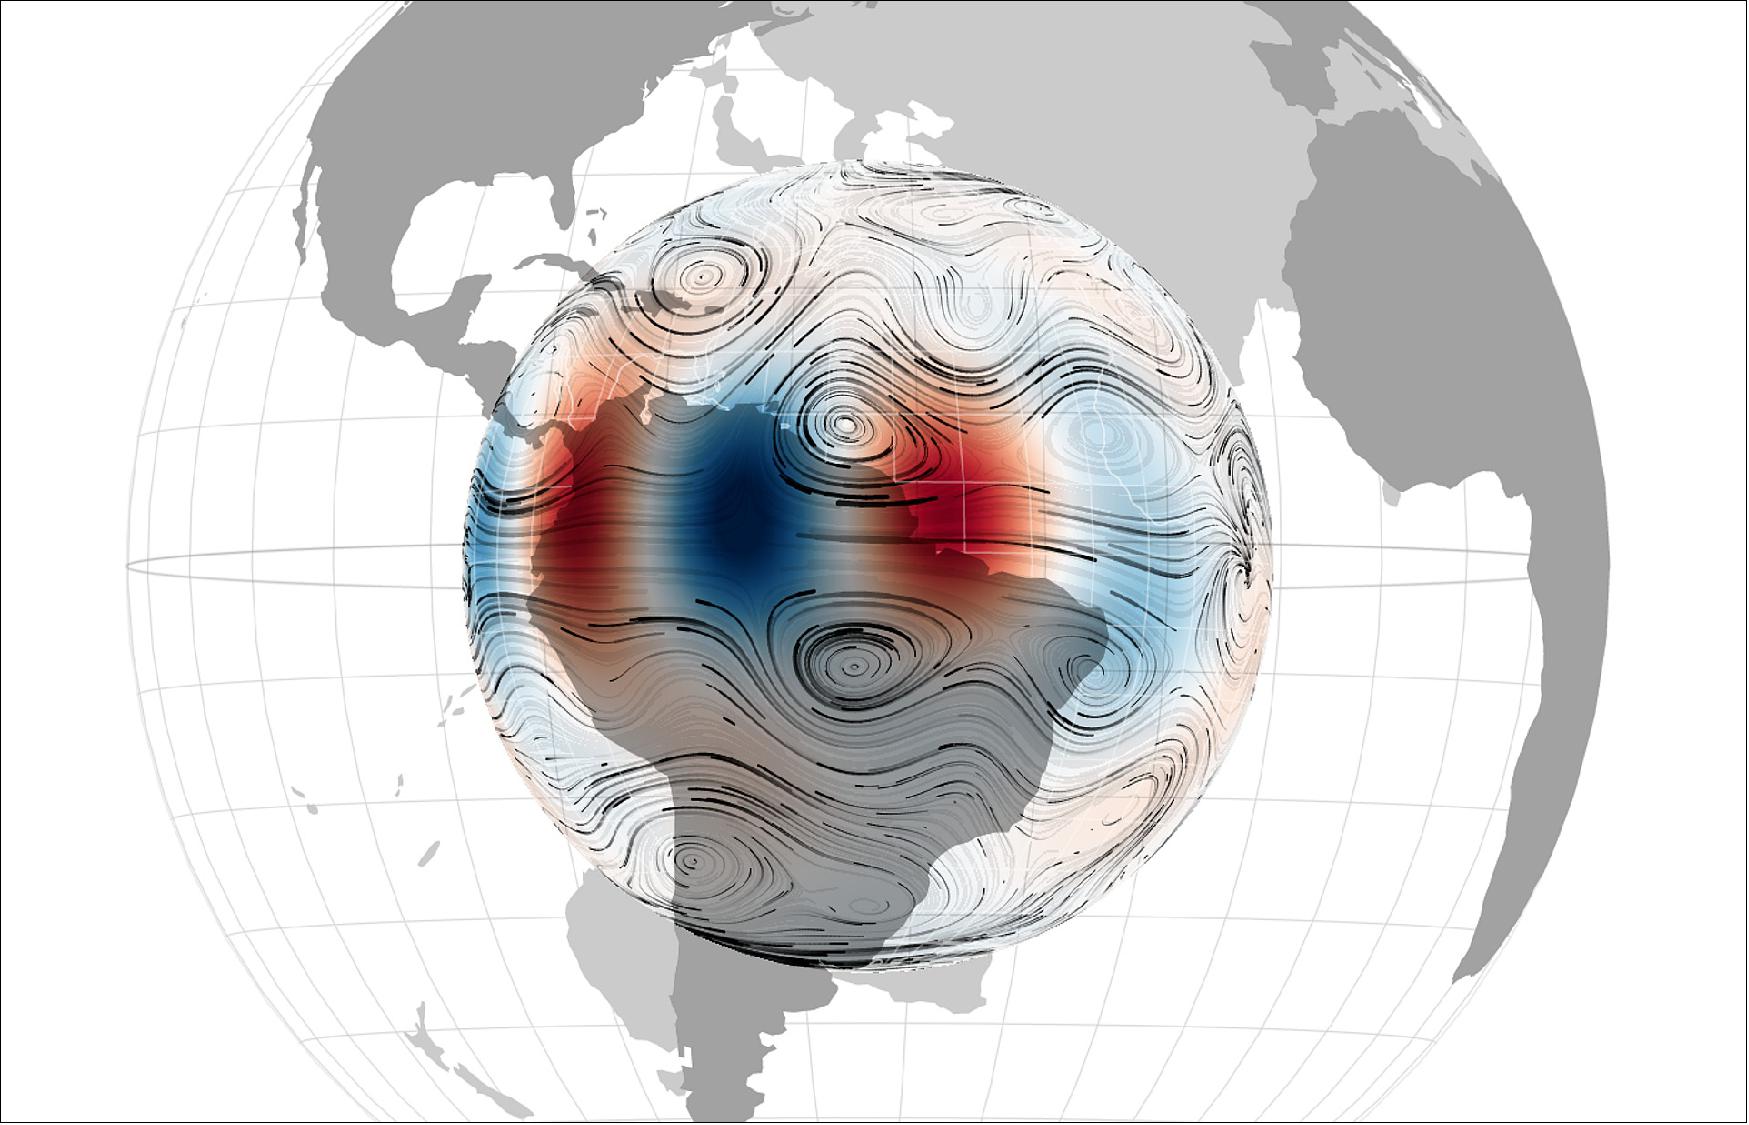 Figure 40: Magnetic waves across Earth’s outer core. These waves align in columns along Earth’s axis of rotation. The motion and magnetic field changes associated with these waves are strongest near the equatorial region of the core (image credit: University Université Grenoble Alpes)